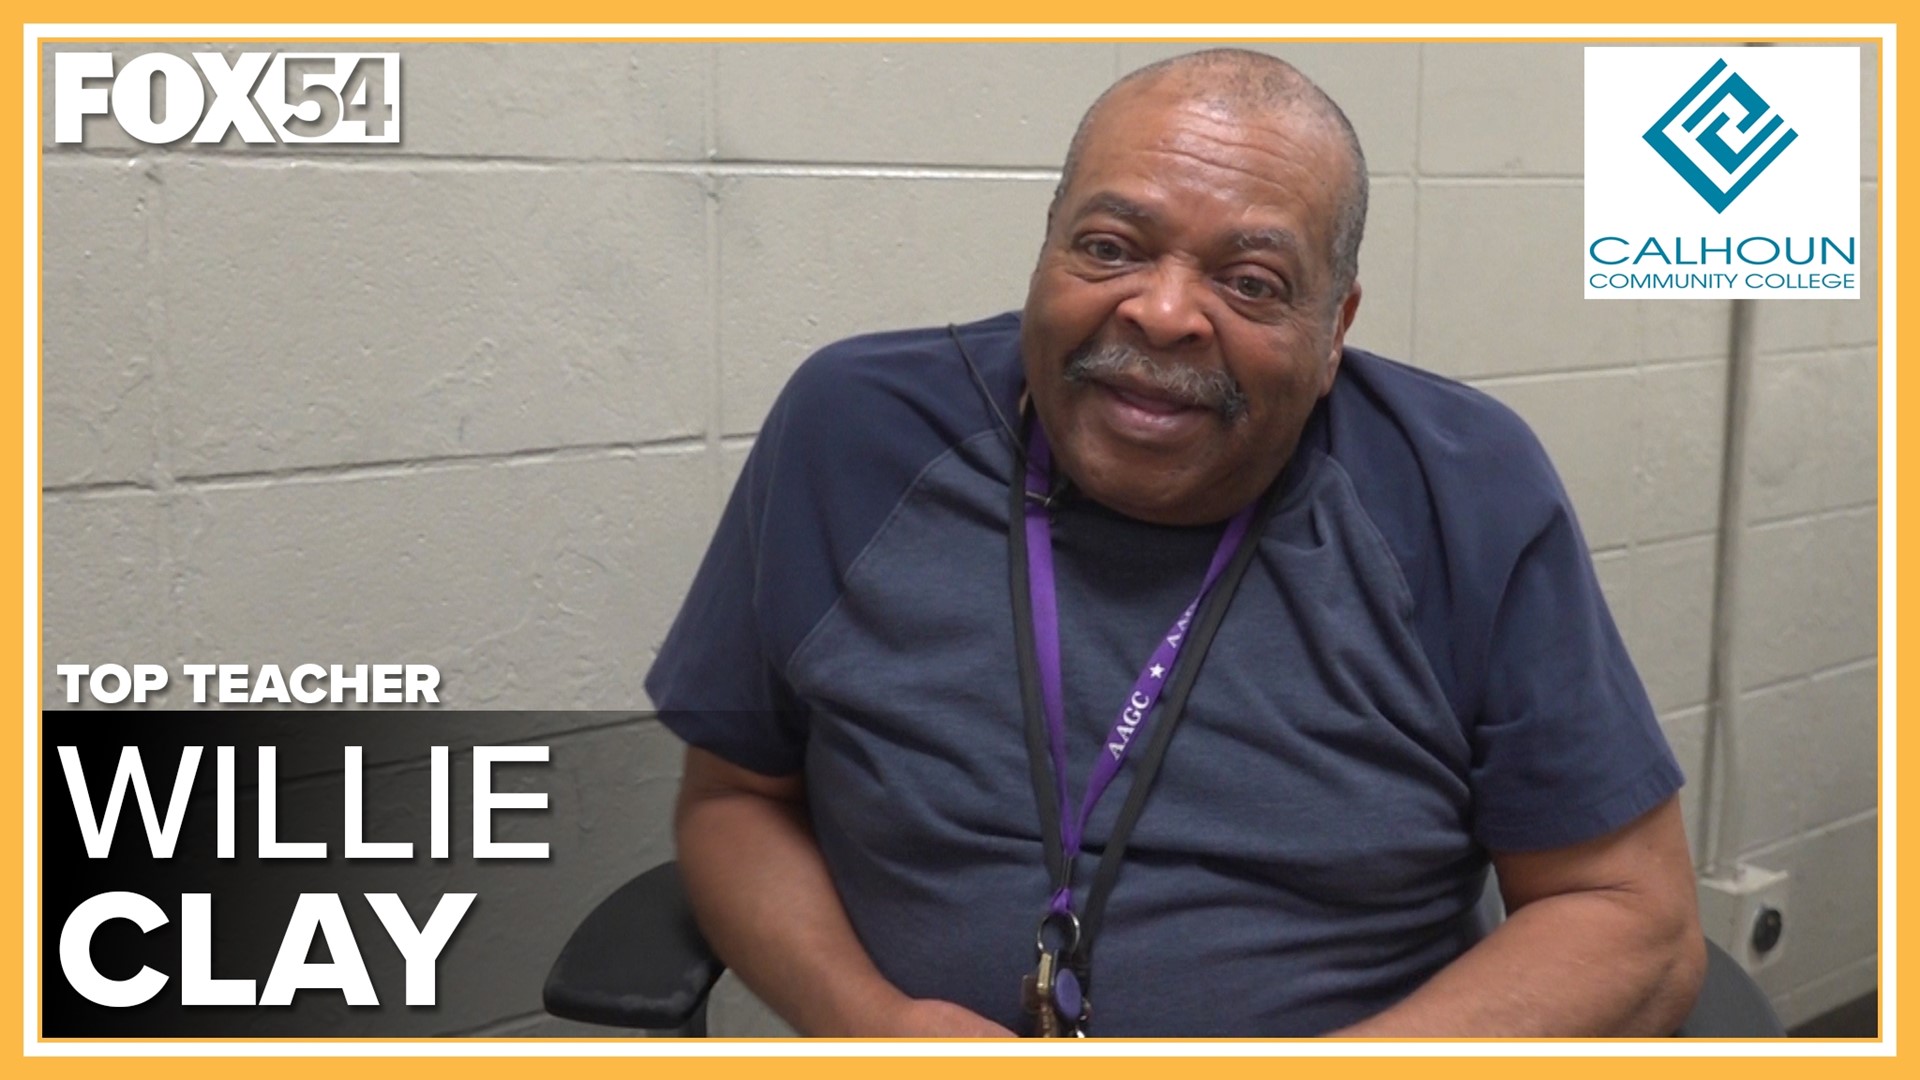 Mr. Willie Clay has been a teacher with Huntsville City Schools for 54 years. He's taught for the last ten years at Martin Luther King, Jr. Elementary School.